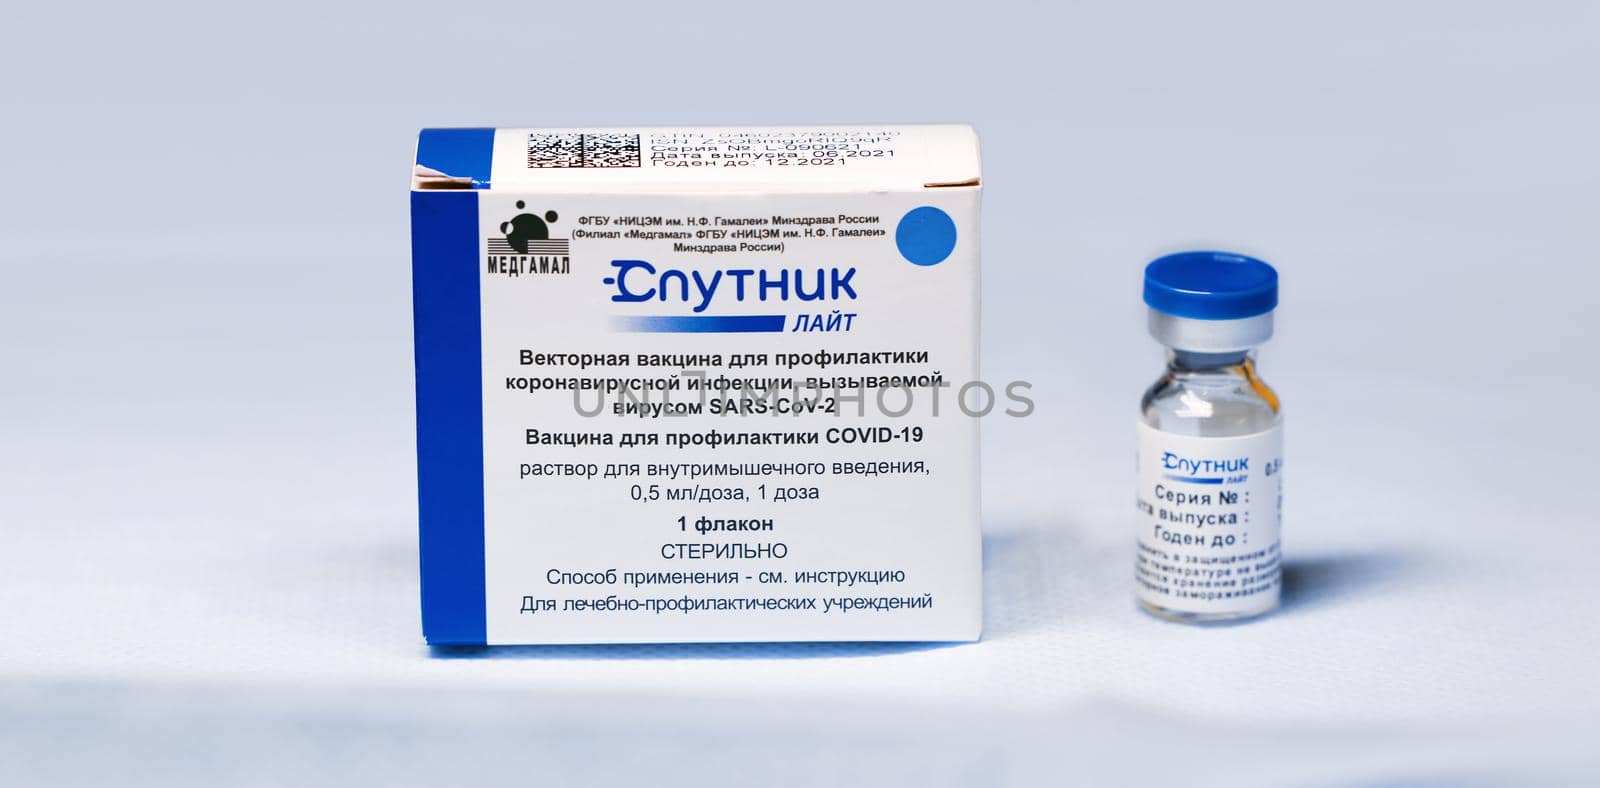 Box and ampoules with new Russian vaccine against coronavirus SARS-CoV-2, Sputnik Lite. Vaccine for prevention COVID-19. 26.08.2021, Moscow, Russia by EvgeniyQW